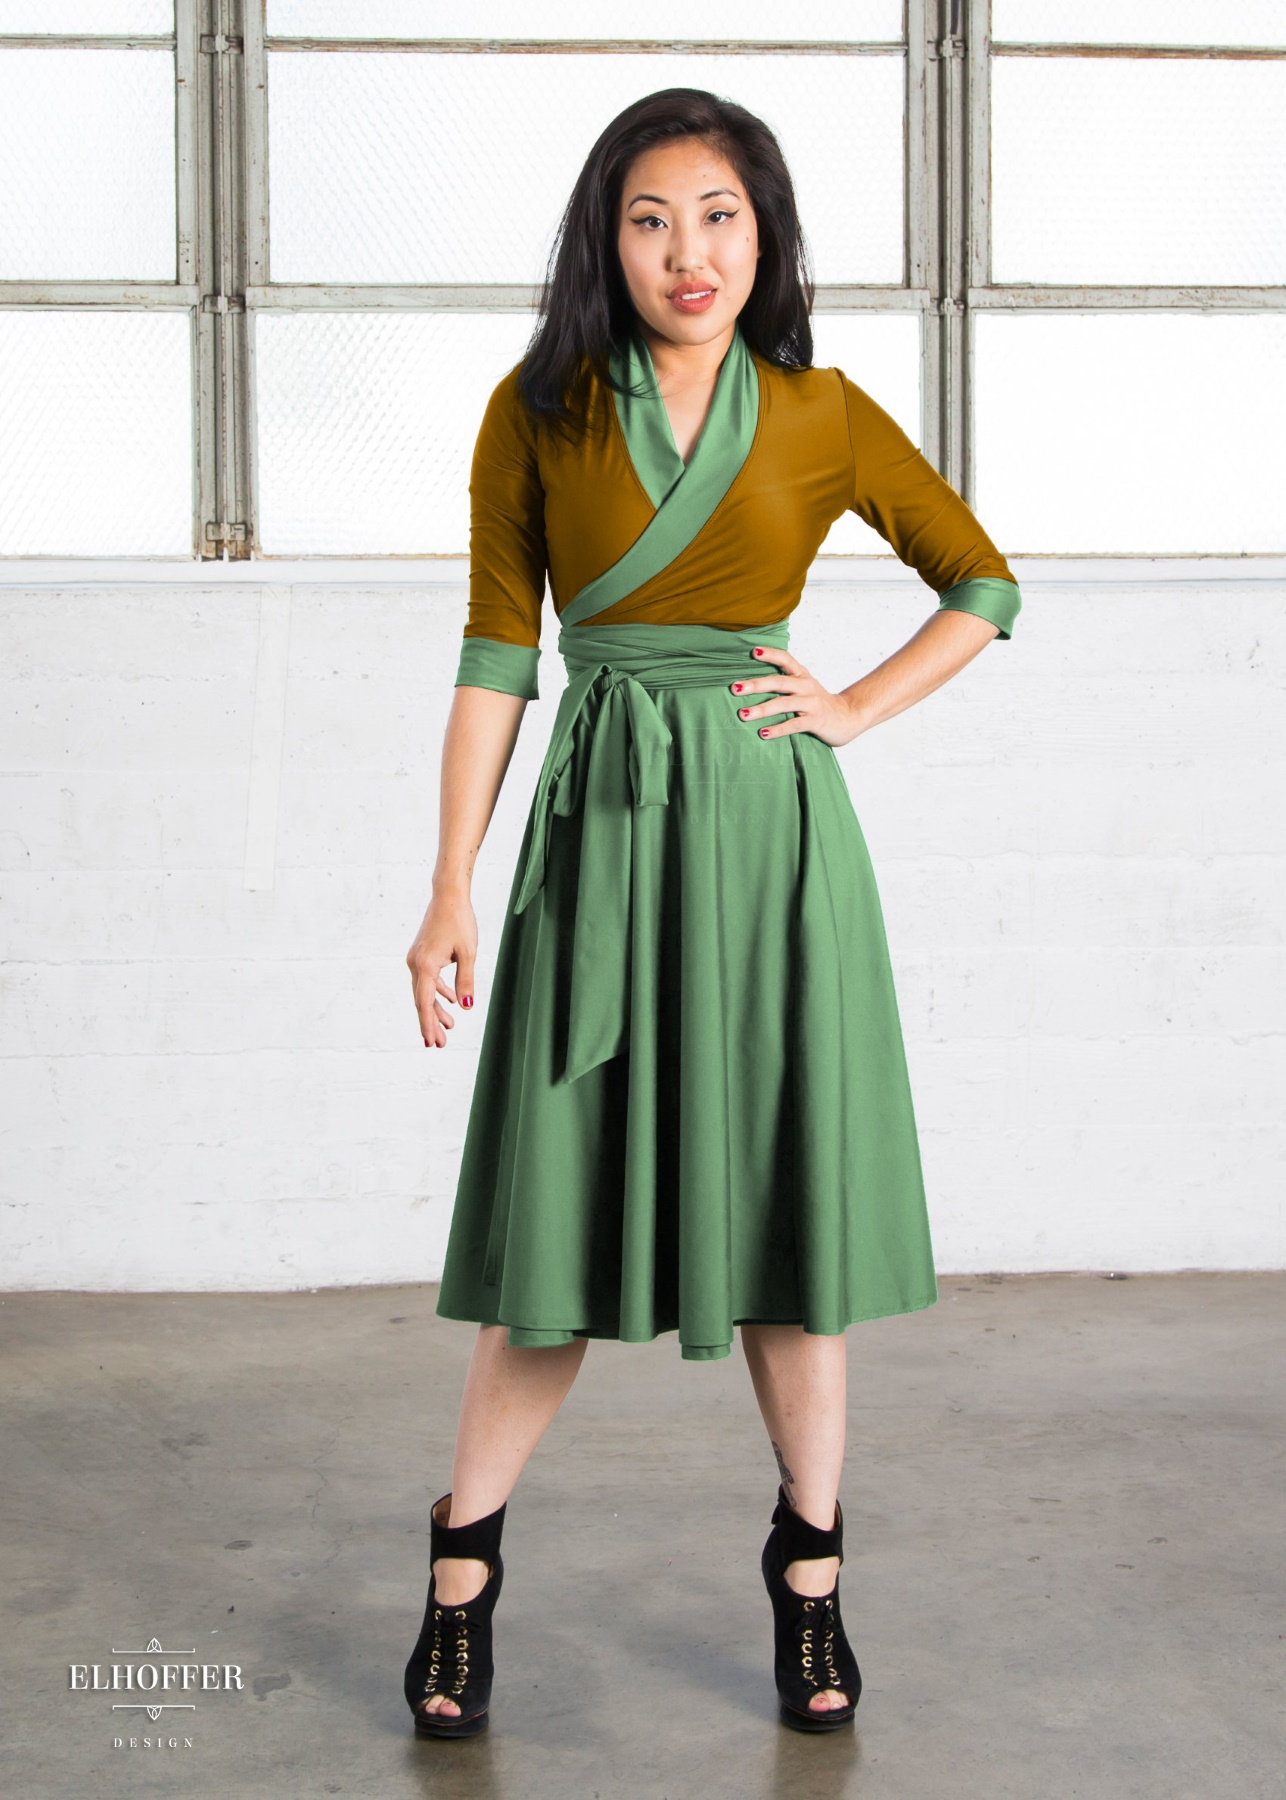 Elhoffer Design Galactic Asset Wrap Dress Inspired by The Mandalorian The Child